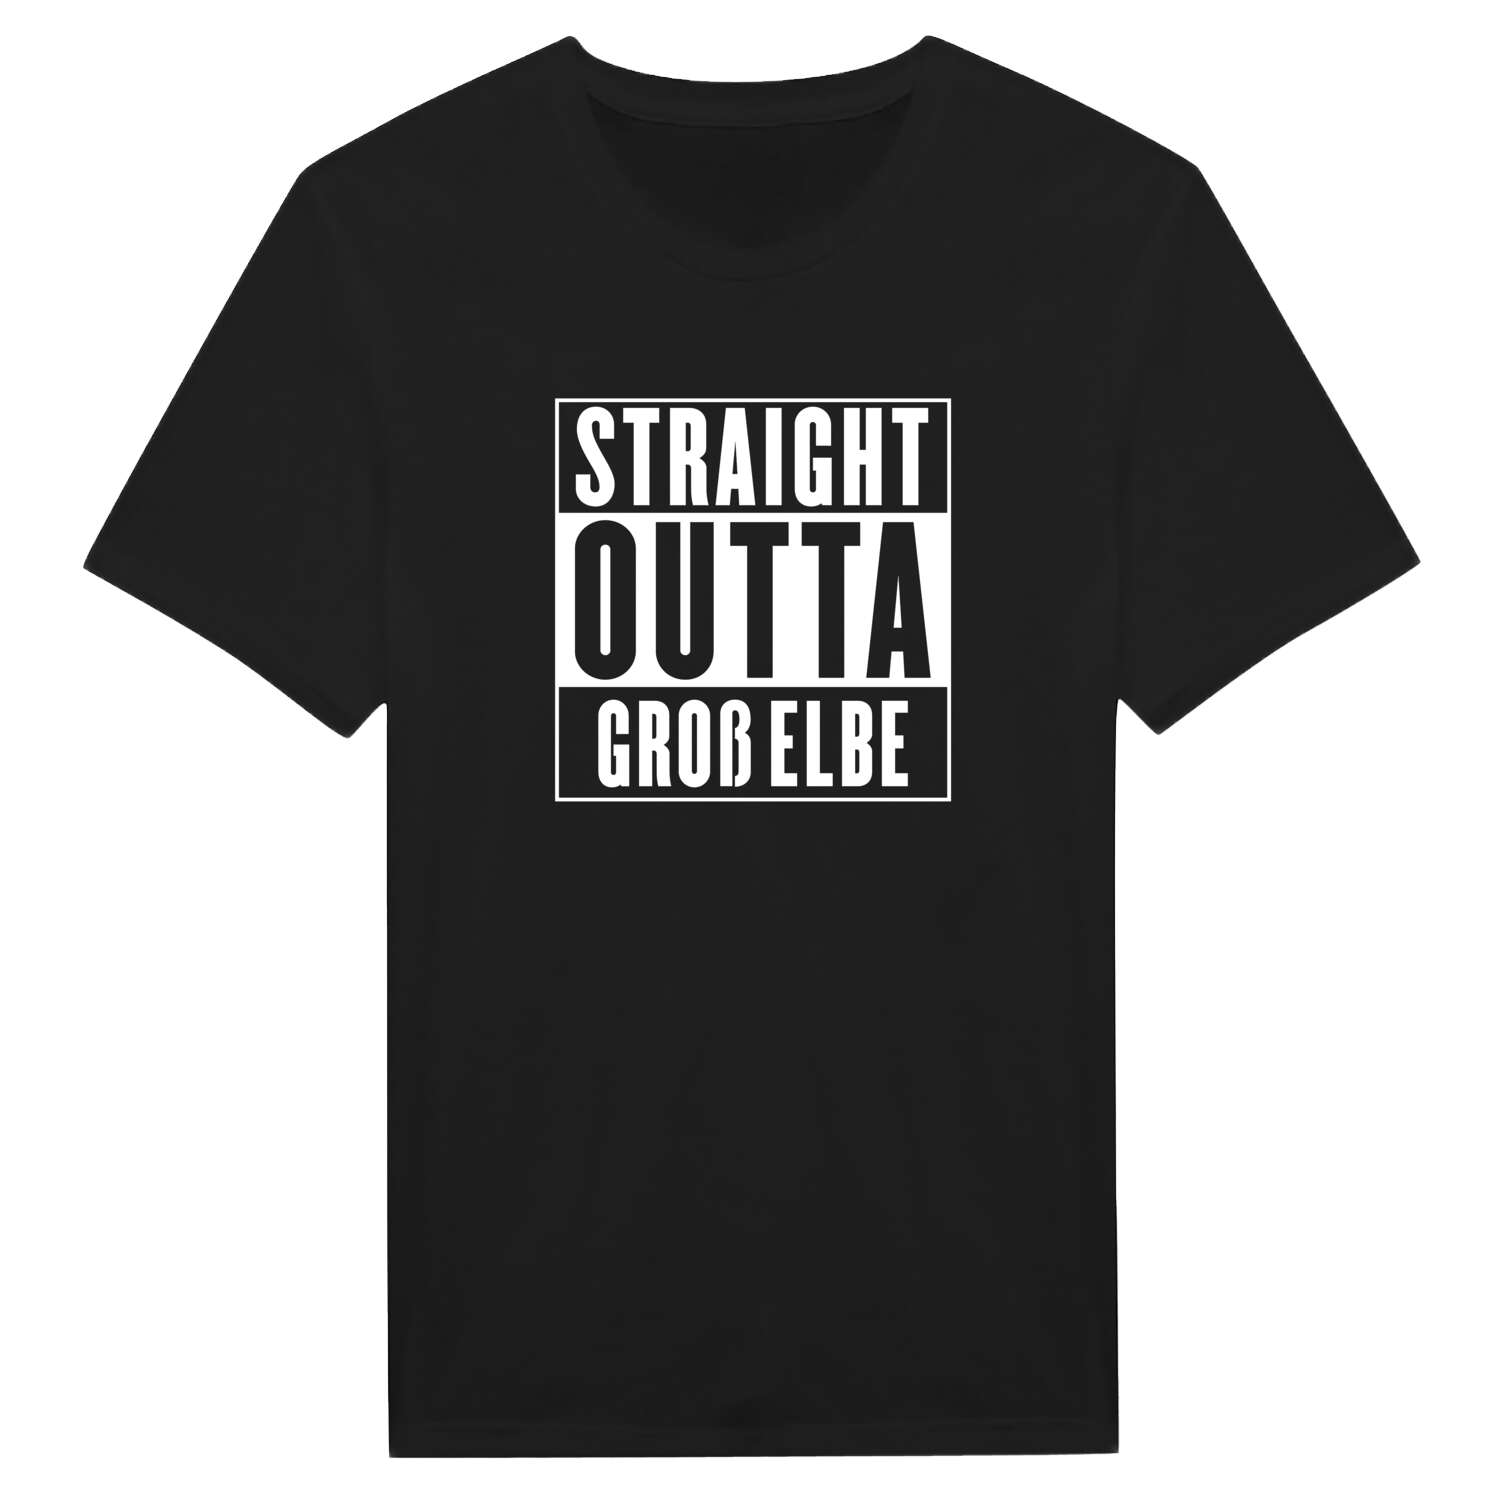 Groß Elbe T-Shirt »Straight Outta«